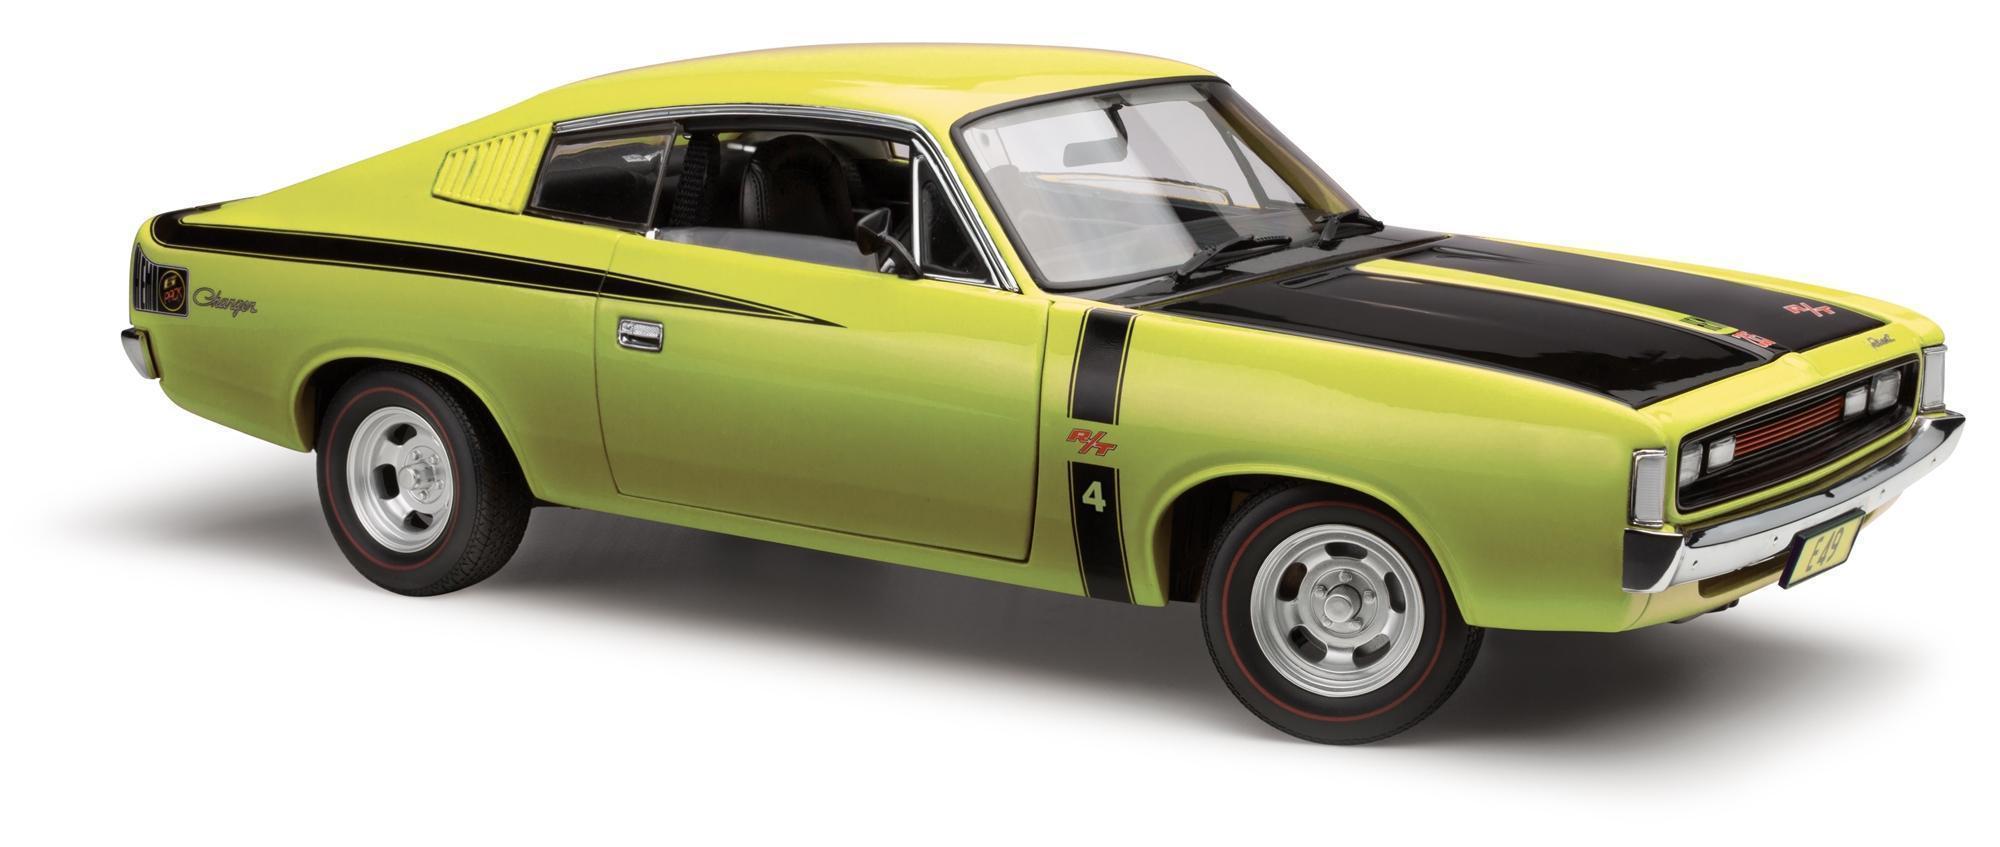 Limelight Charger 1:18 Scale Model Car